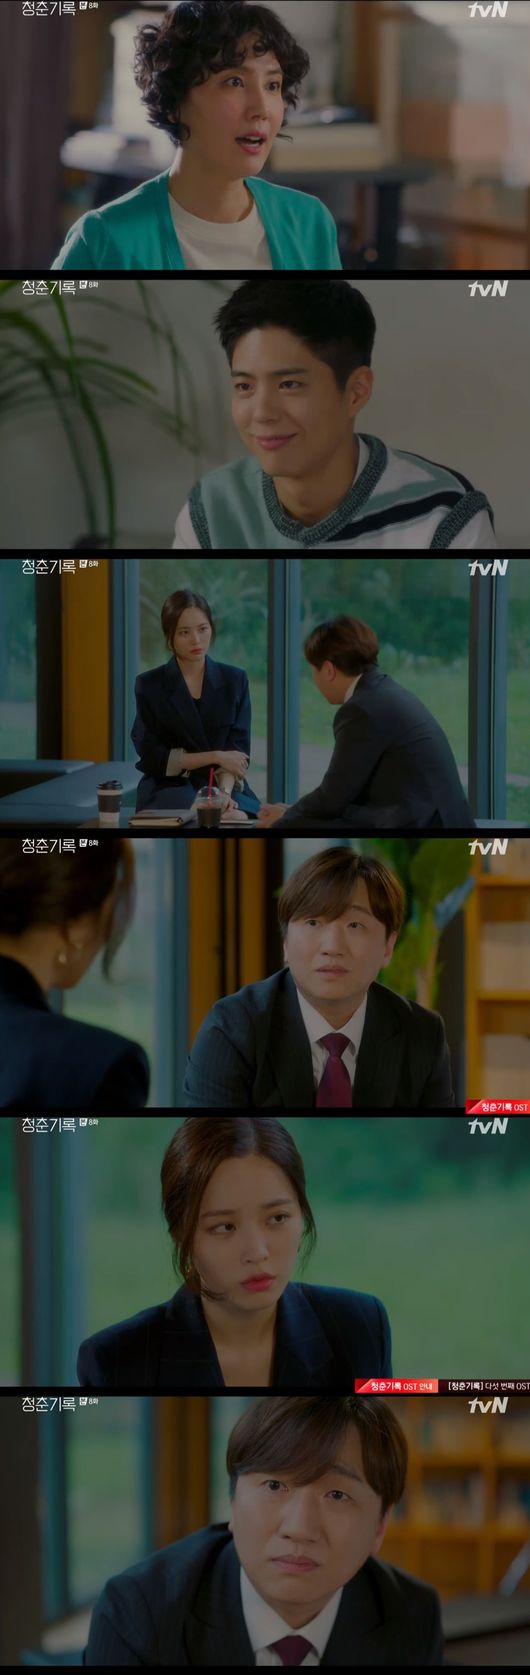 Park Bo-gum has become a rising star but Lee Chang-hoon is ready to disrupt it.On TVN Record of Youth broadcast on the 29th, when Park Bo-gum became a rising star in the morning, Lee Tae-soo, the former agencys representative, began to interfere with it.On this day, Sa Hye-joon visited the house of Ahn Jeong-ha (Park So-dam) to dye her hair before shooting the drama, and she gave her hair a dye after applying oil with a careful and stable mind.When I saw the head of Sa Hye-joon, I was satisfied that it worked well.Sa Hye-joon started filming Drama Gateway and, as a doctor, he threw a word to Lee Hyun-soo (Seo Hyun-jin) saying, I want to make a sister.Han Ae-sook and Sam Min-ki (Han Jin-hee) were thrilled to see Drama with Sa Hye-jun coming out; Sam Min-gi showed tears and said, Hes done.But Sa Yeong-nam (Park Soo-young) didnt even look at Drama properly and said, Dont wind it up for nothing.Kim Yi-young (Shin Ae-ra) looked at Sa Hye-joons Drama and found Won Hae-hyo (Byeon Woo-seok); Kim Lee Young-eun said, You will be better, dont worry.Kim Lee Young-eun Won Hae-hyo appeared together in Park Do-has Drama and expected to hit the jackpot.Lee Tae-soo and Park Do-ha were angry at the fact that Sa Hye-joon was rising when they saw Drama Gateway. Lee Tae-soo told Park Do-ha, You are the tower.When it airs, everything will be focused on you. But Sa Hye-joon was reborn as a rising star after shooting Drama Gateway.In addition, as Park Do-has cosmetics advertisement was canceled and the possibility of Sa Hye-joon becoming a new model increased, Lee Min-jae shouted to Lee Tae-soo.